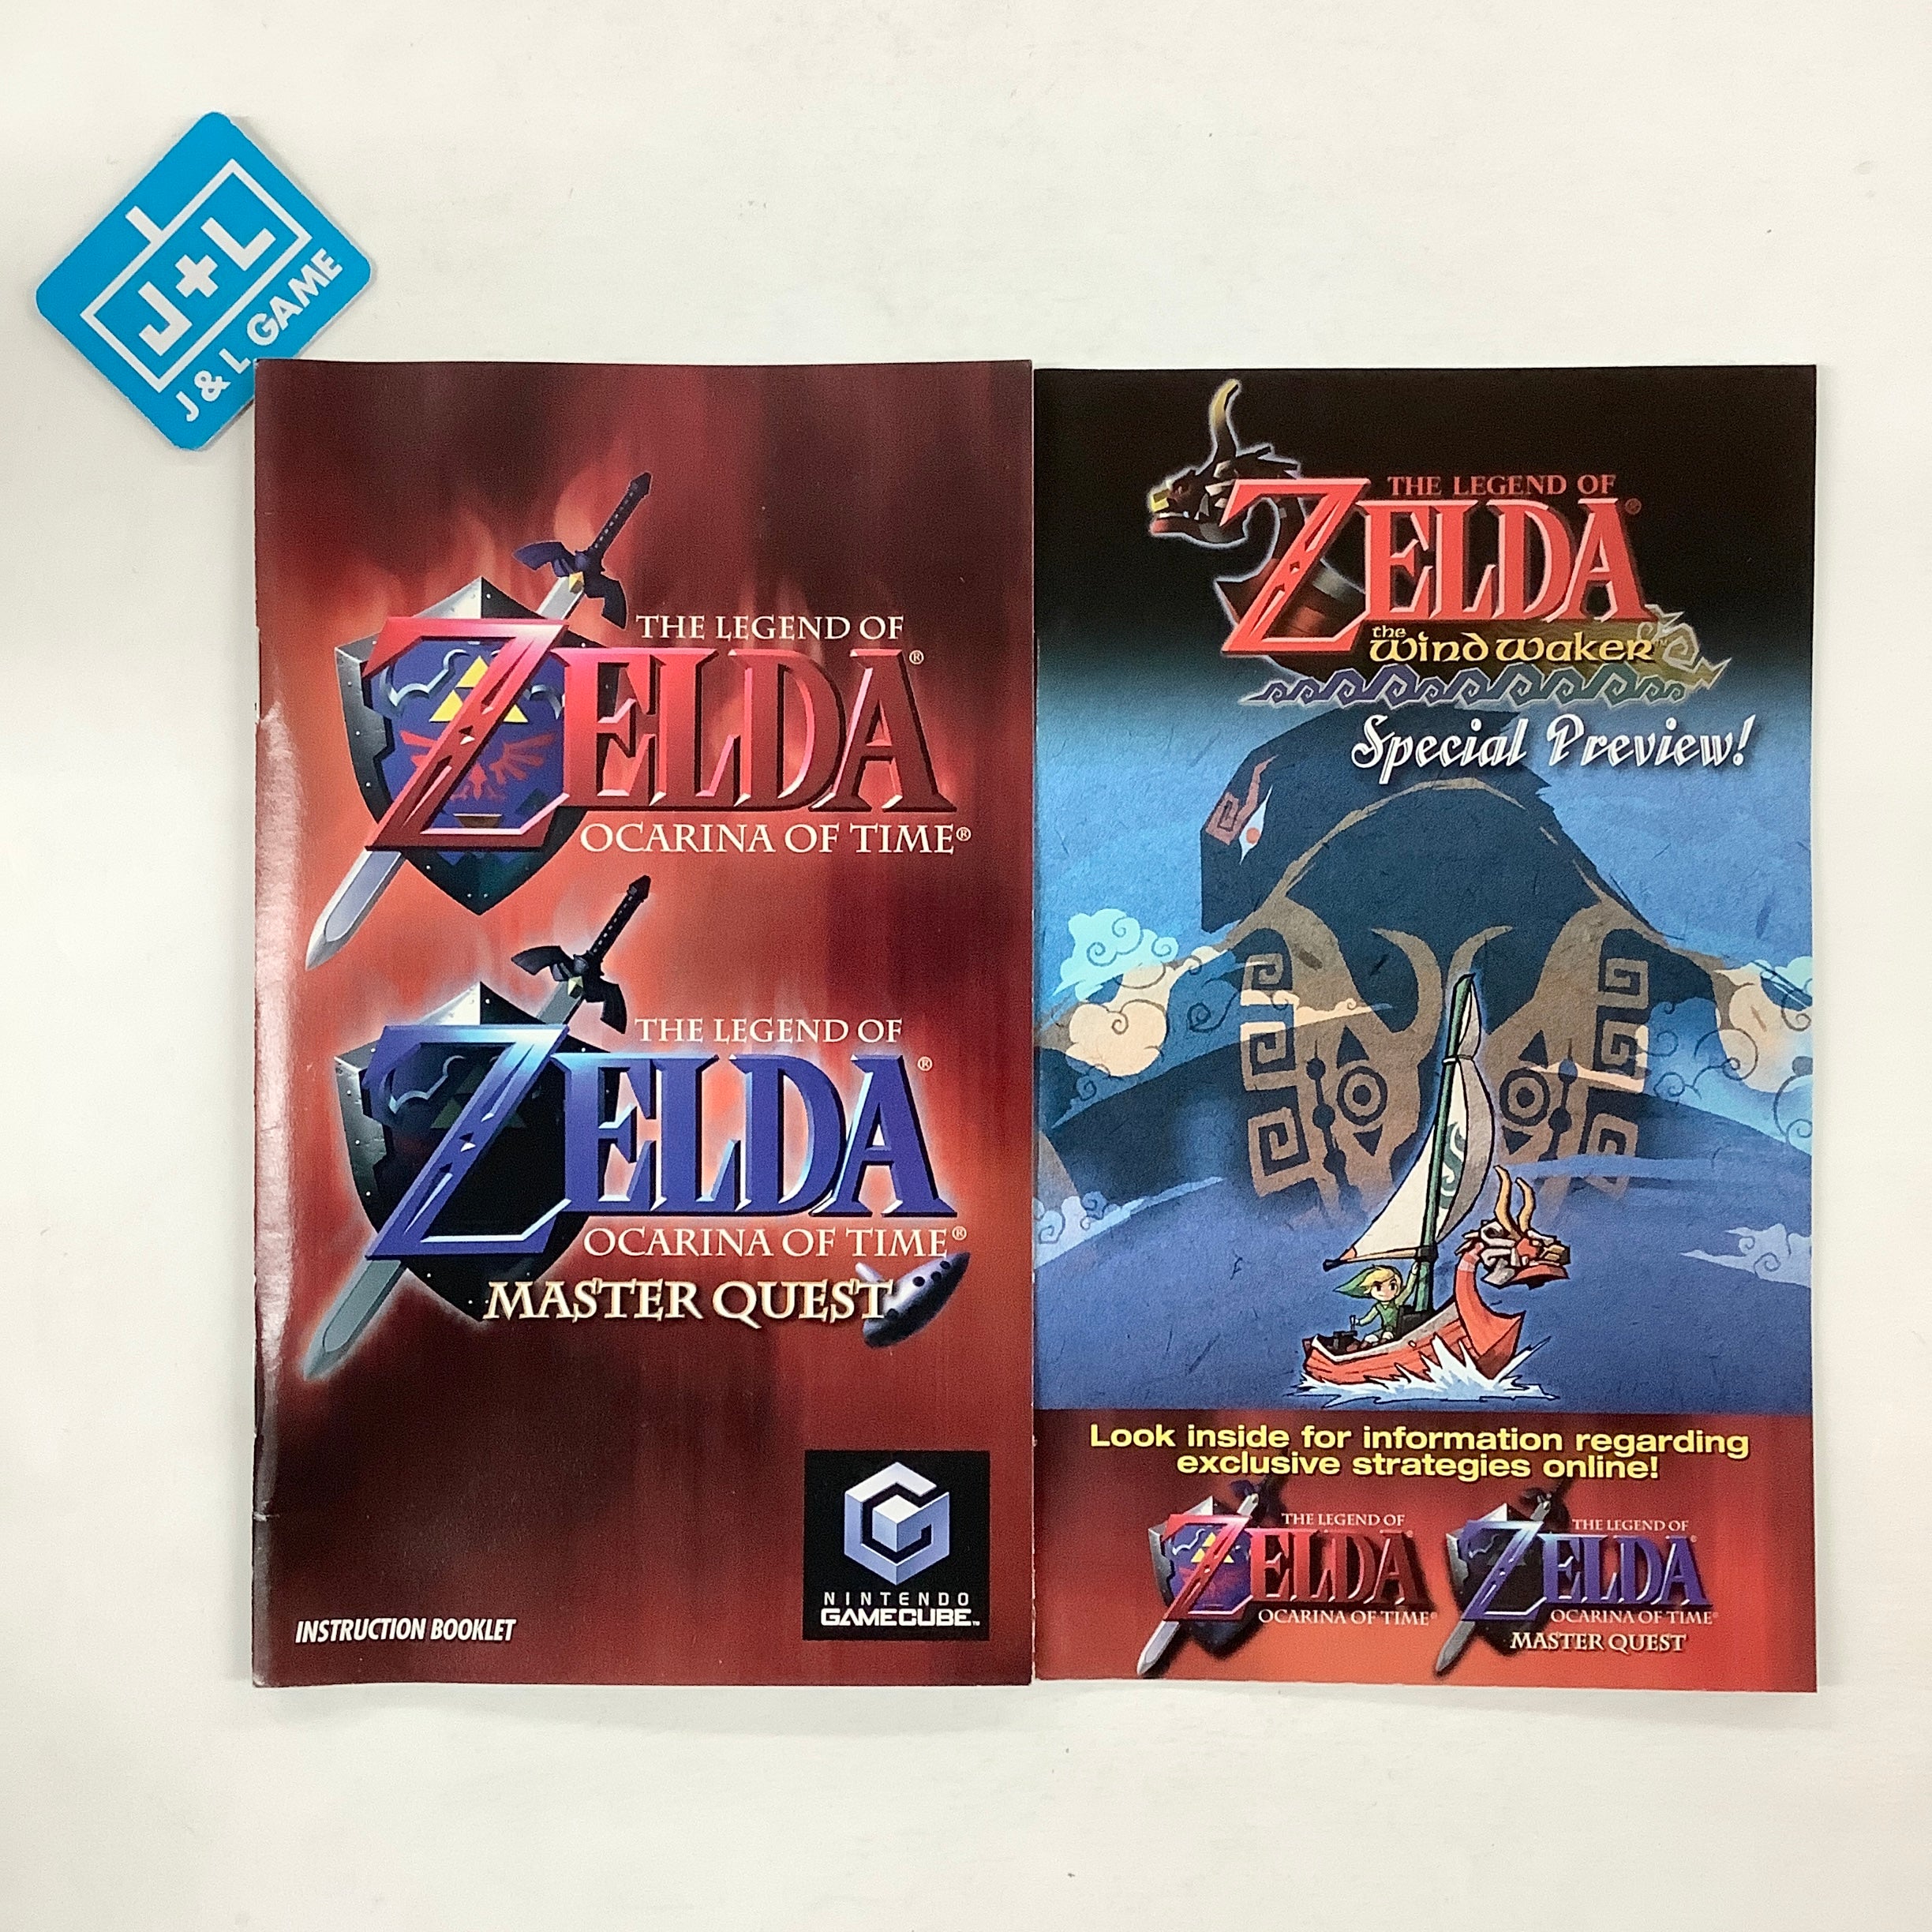 The Legend of Zelda: Ocarina of Time / Master Quest - (GC) GameCube [Pre-Owned] Video Games Nintendo   